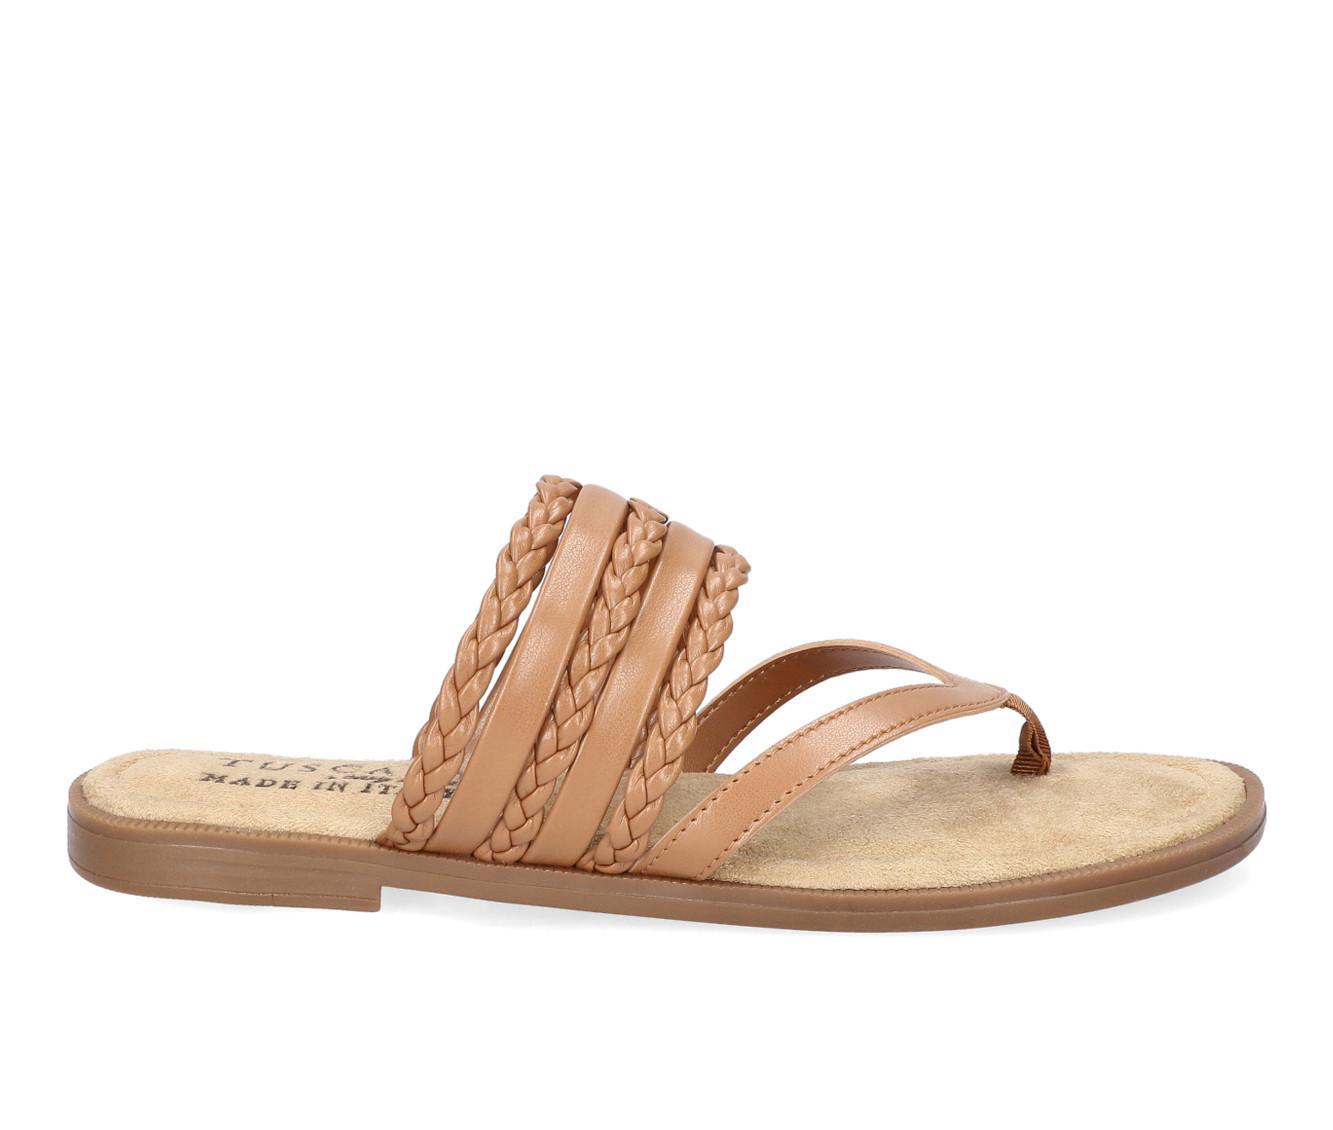 Tuscany By Easy Street, Women's Sandals | Shoe Carnival